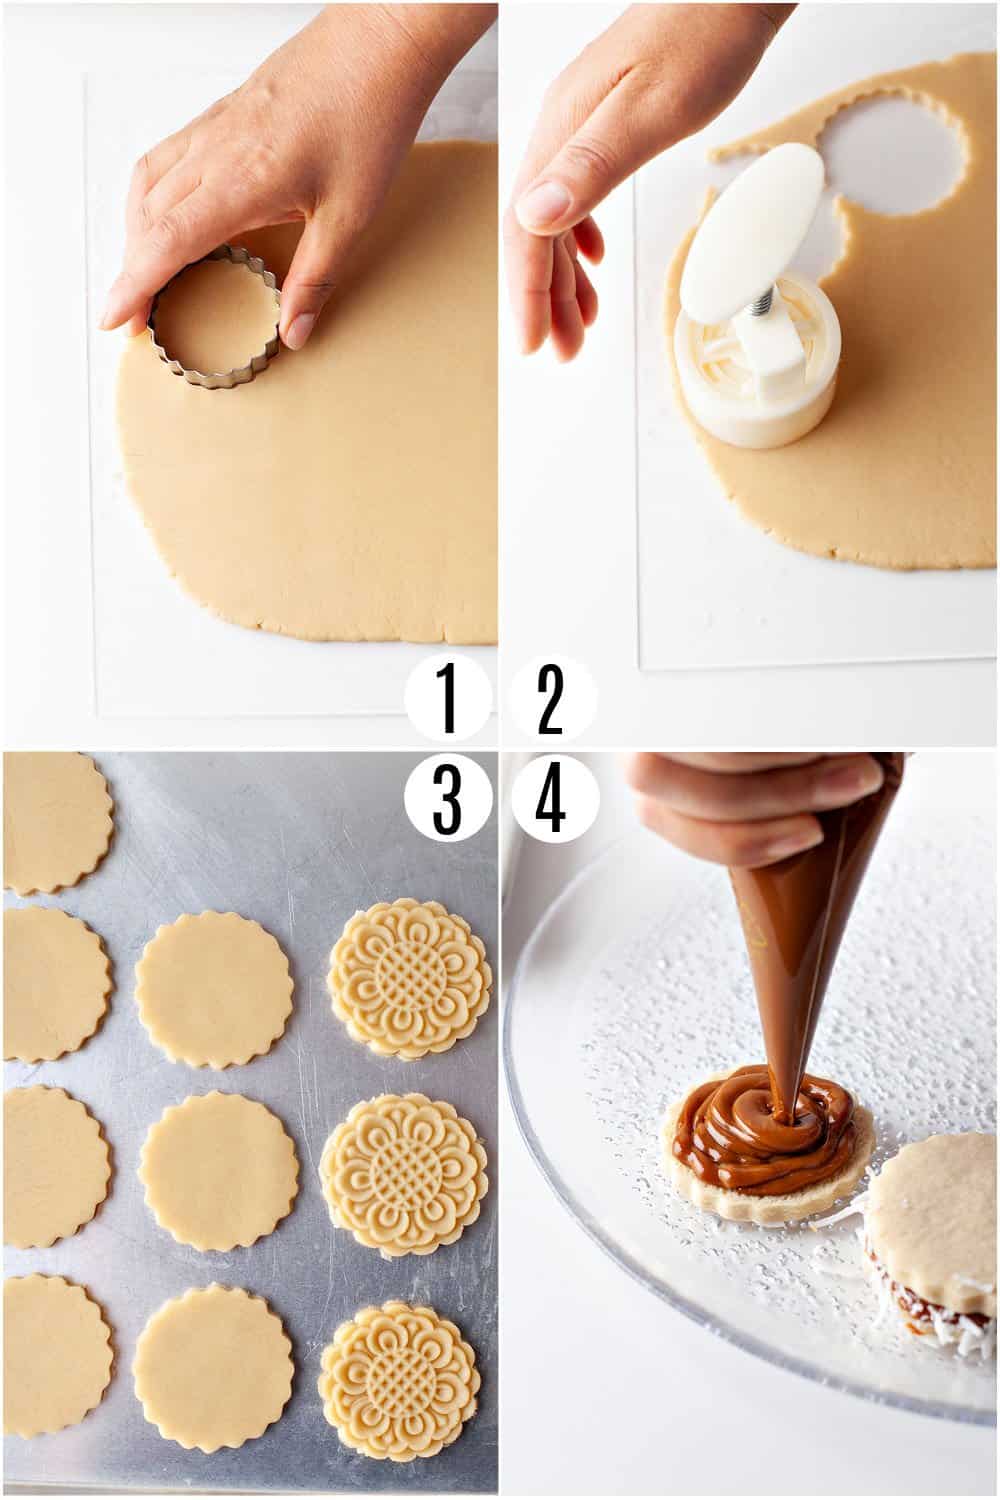 Step by step photos showing how to make alfajores cookies.